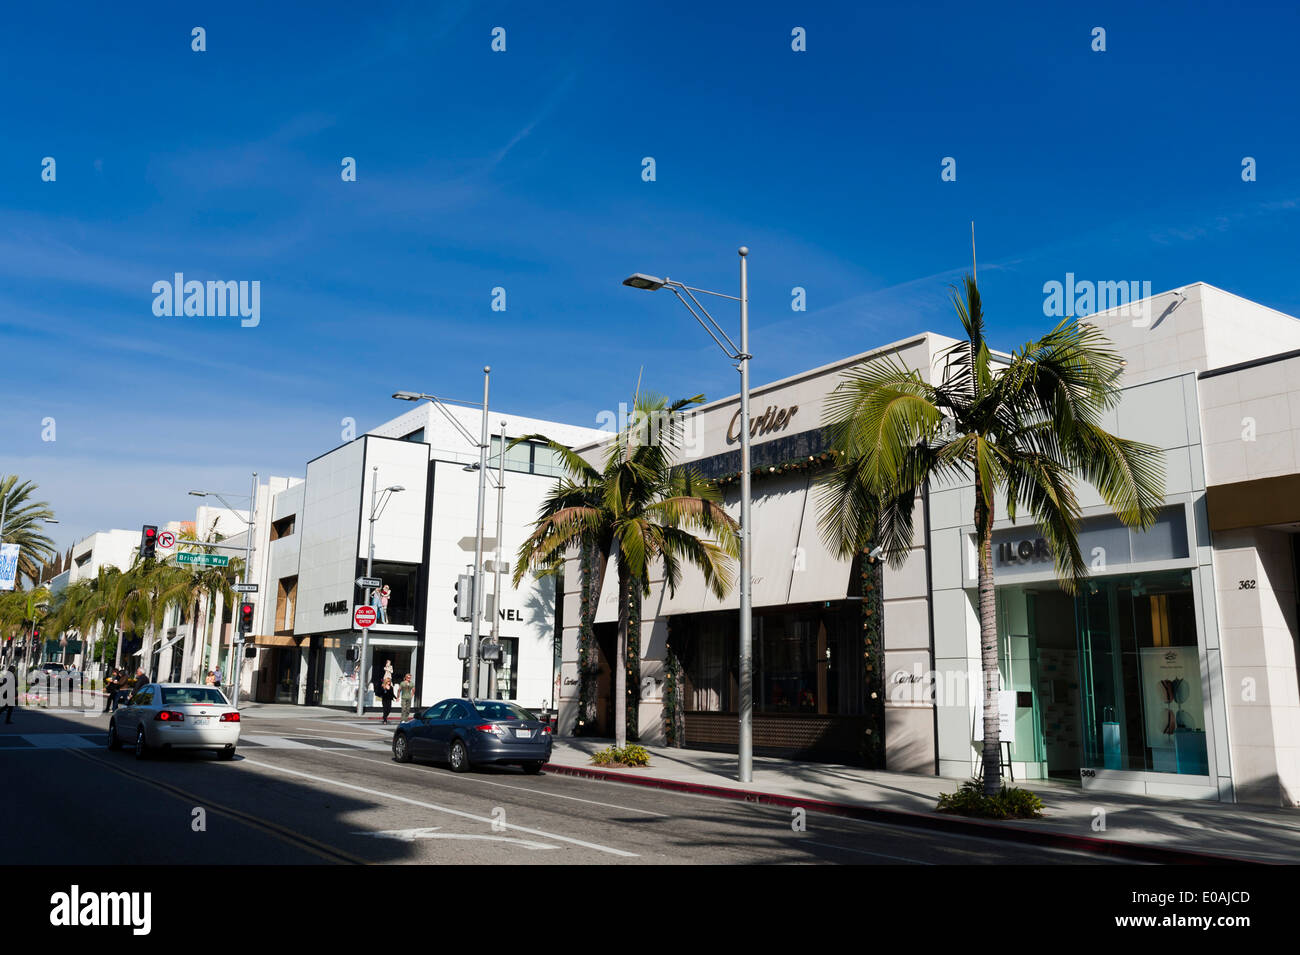 View of Rodeo Drive, Beverly Hills, Los Angeles, California, United States  of America, North America Stock Photo - Alamy